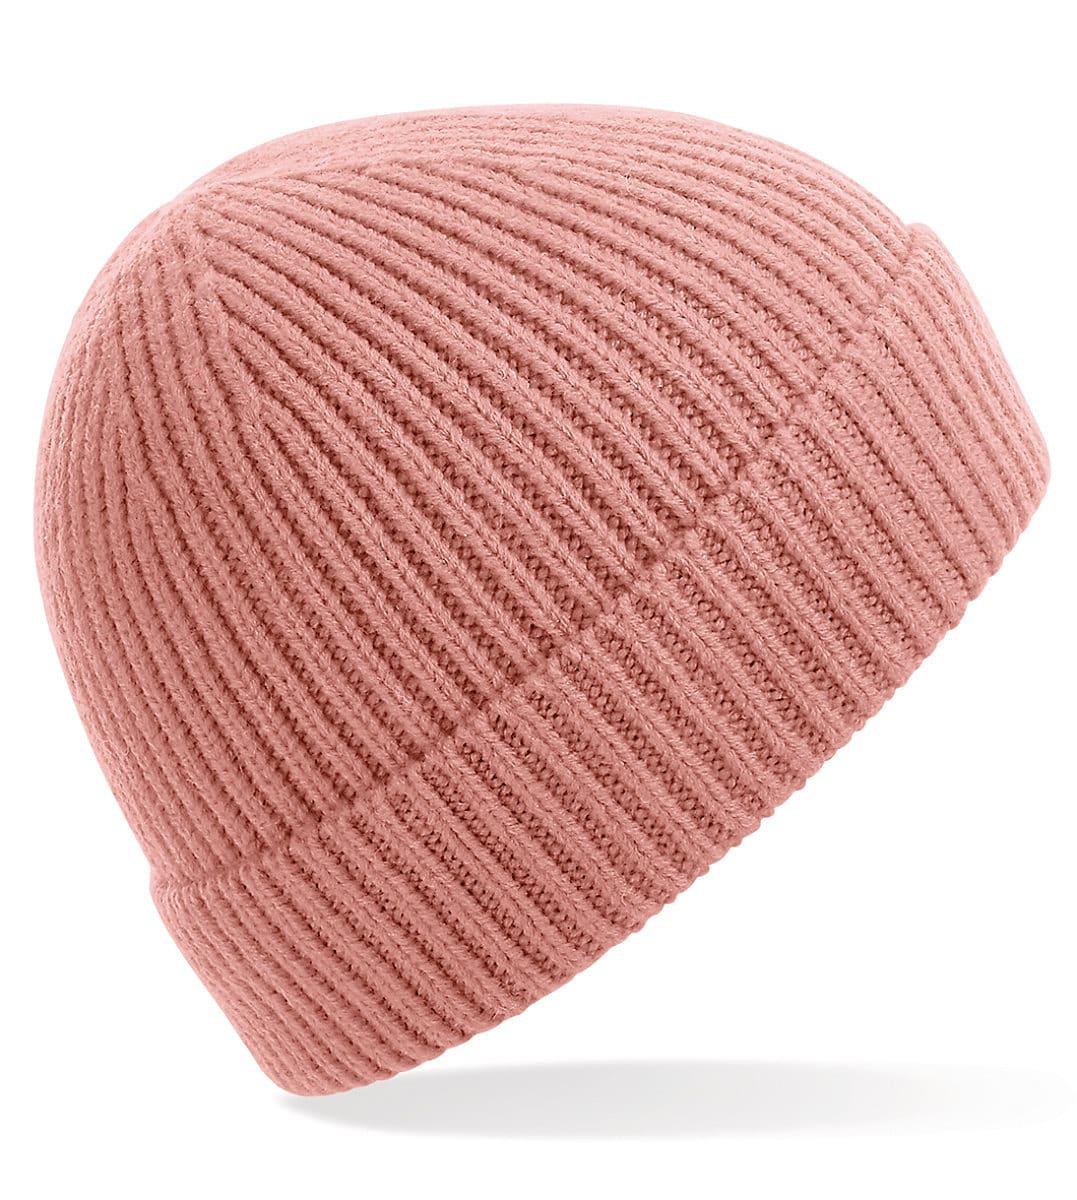 Beechfield Engineered Knit Ribbed Beanie Hat in Blush (Product Code: B380)